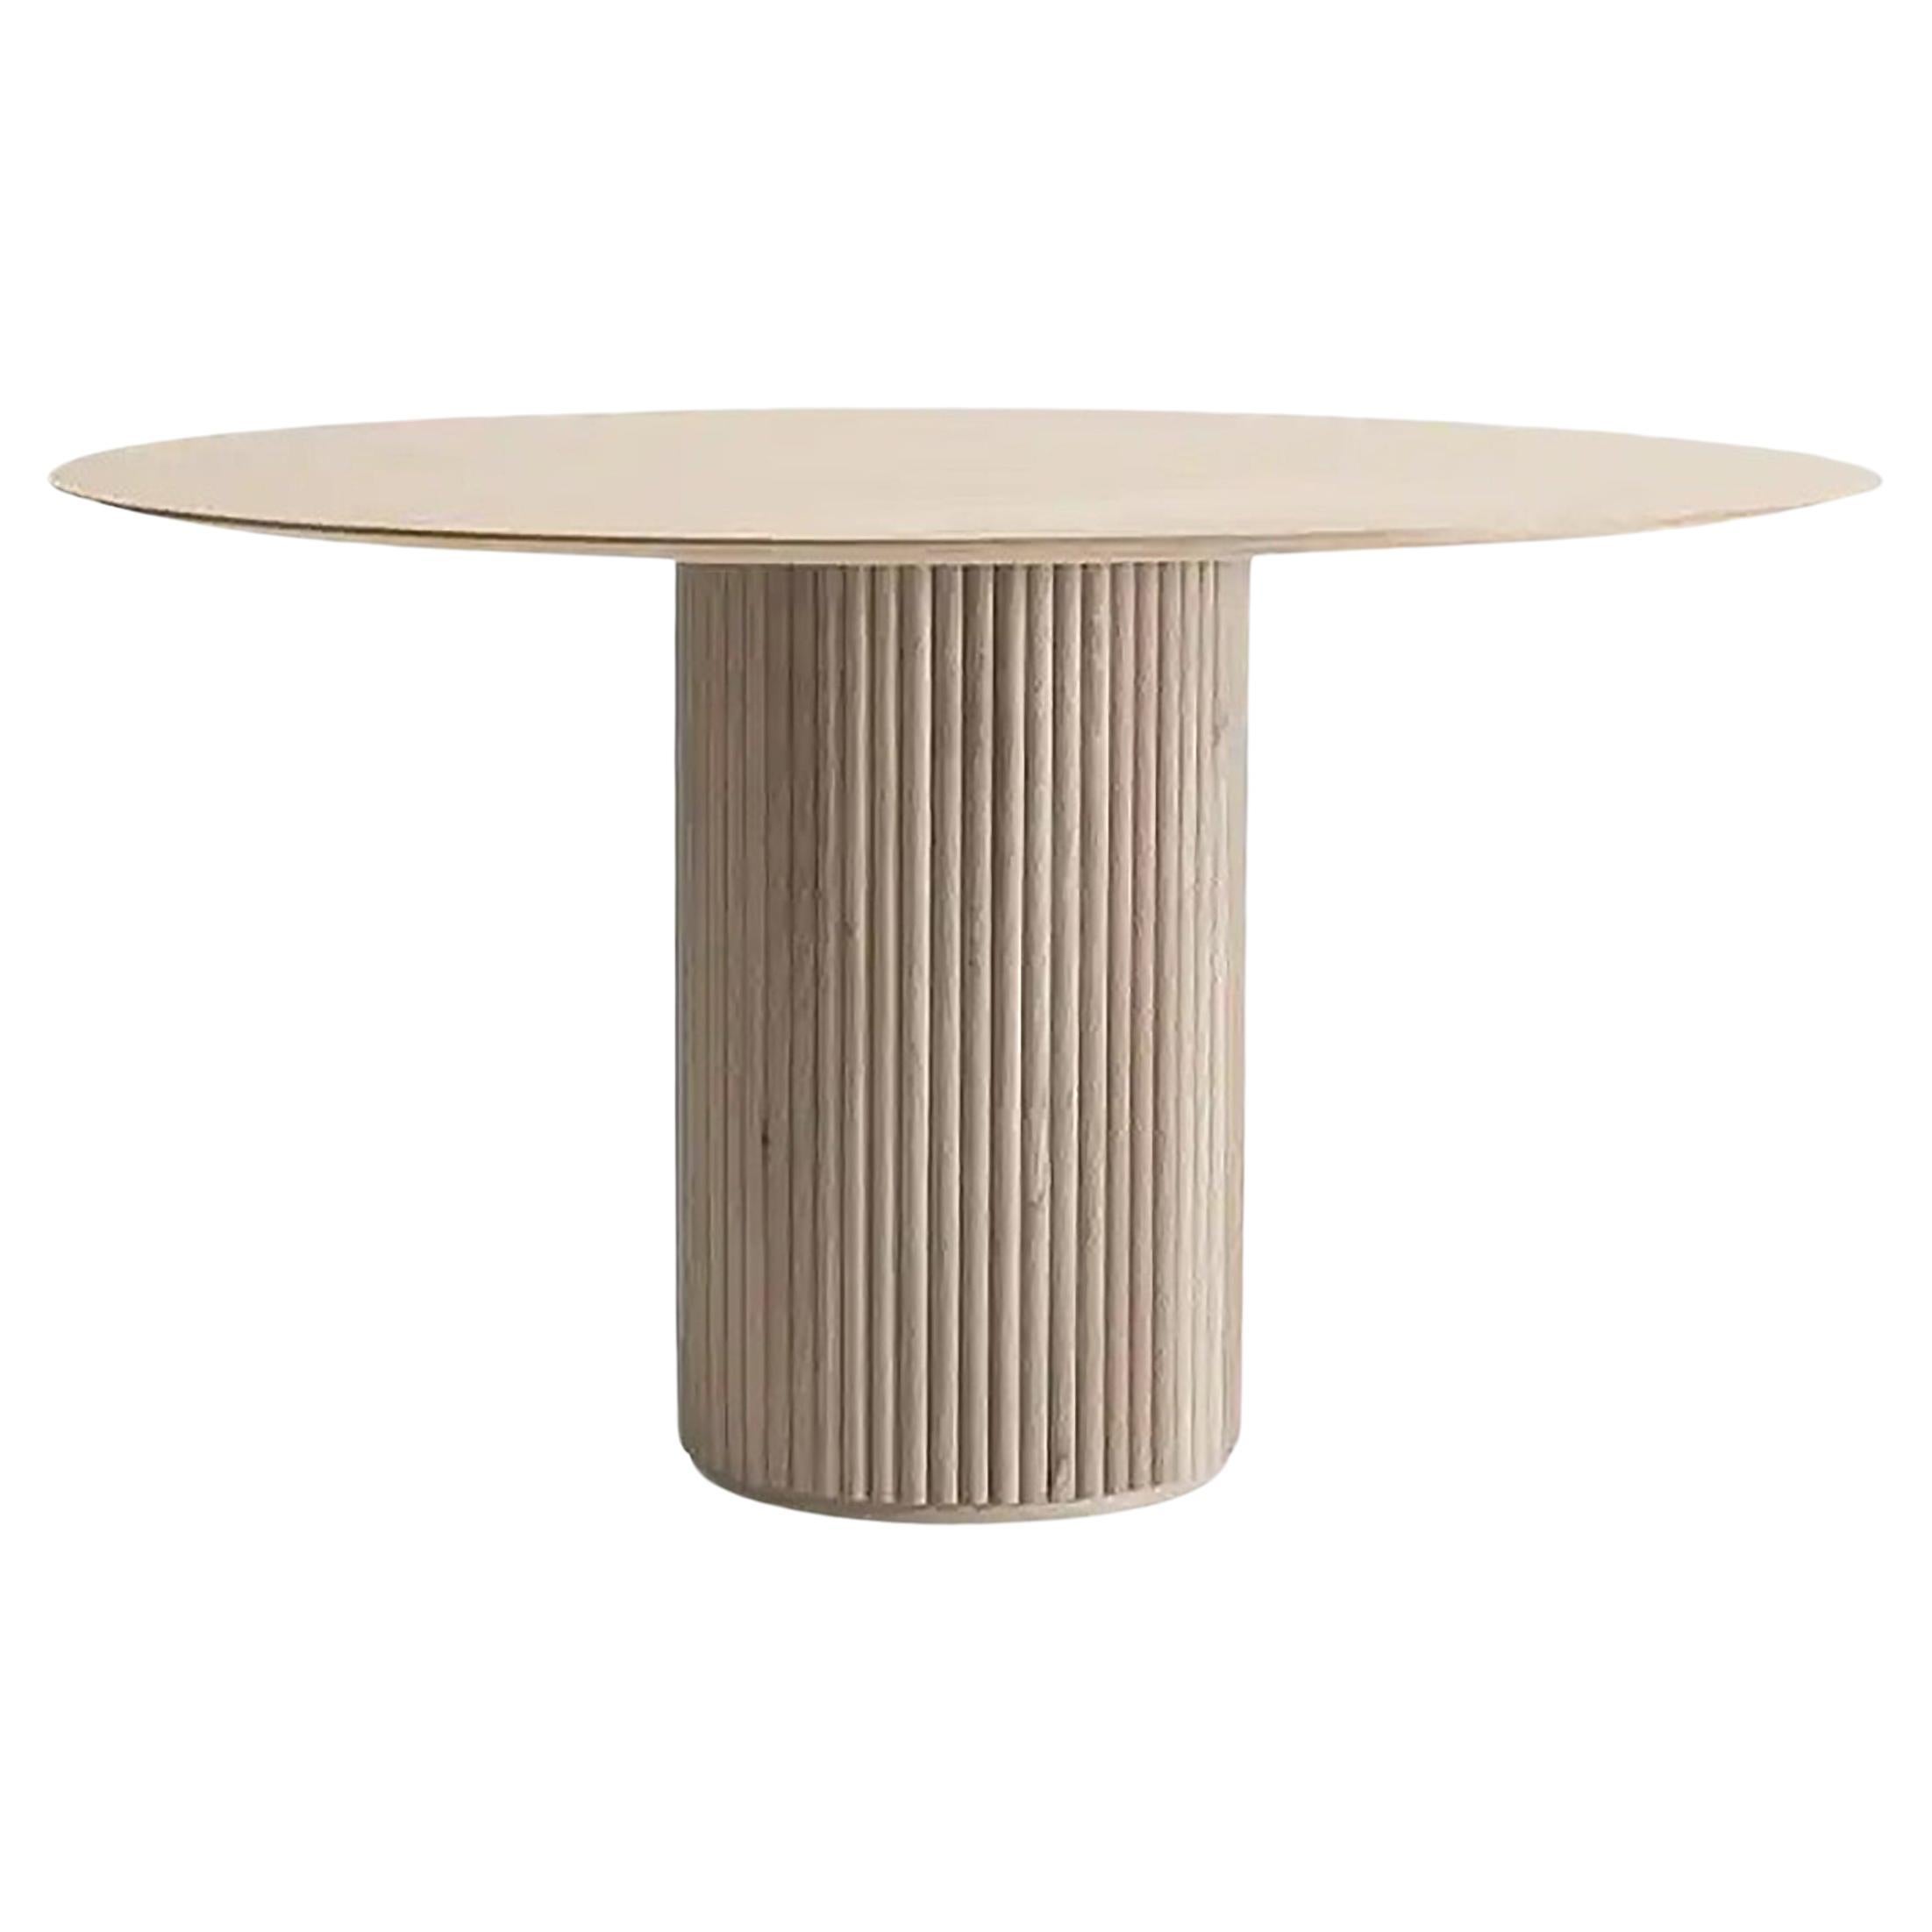 Travertine Dining Table with Fluting